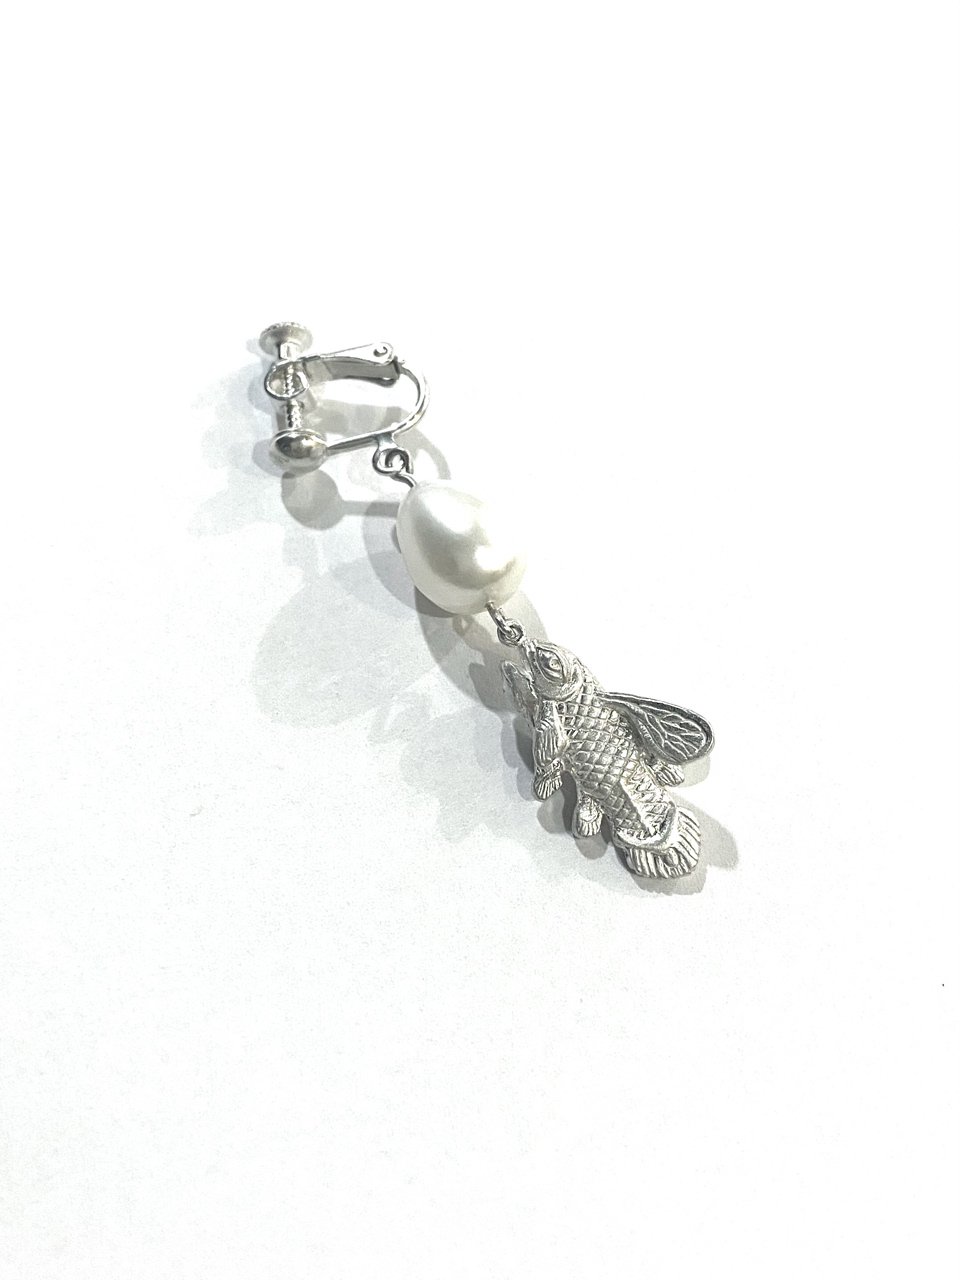 fly coelacanth earring silver 925